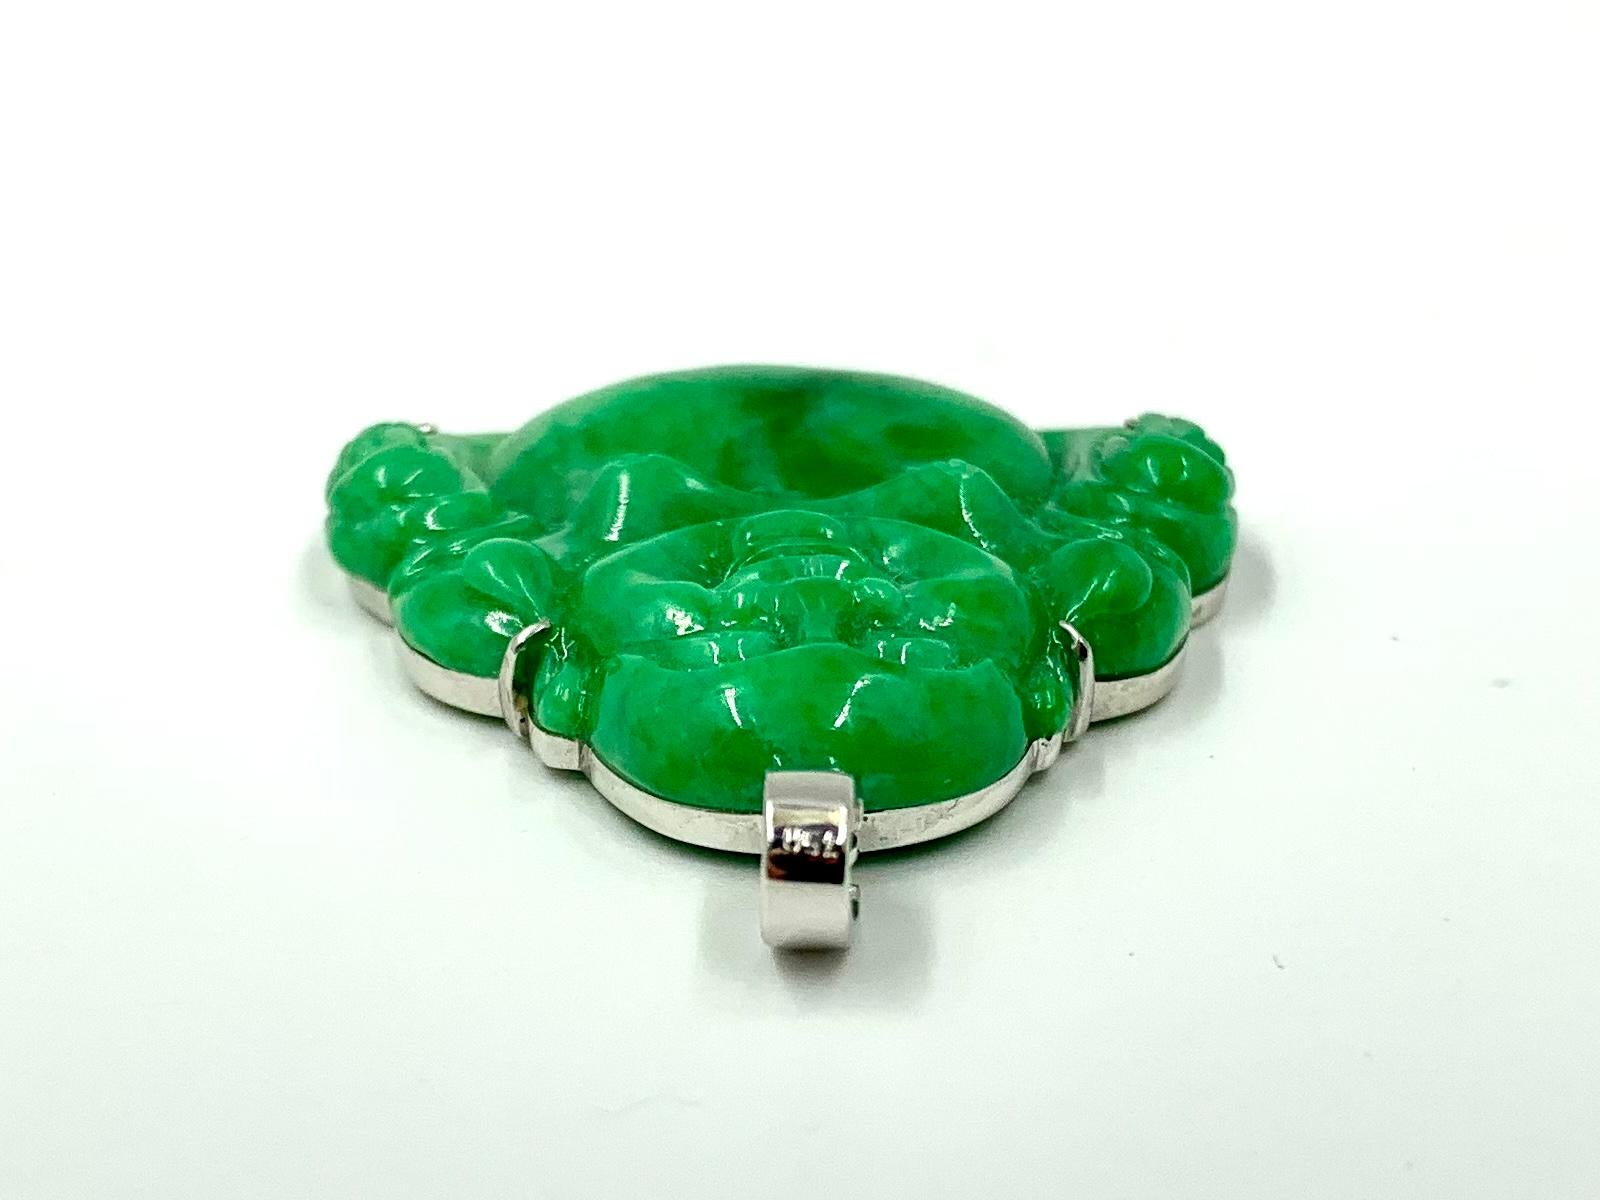 Certified Natural Color Fei Cui Type A Apple Green Jade Laughing Buddha Pendant For Sale 4